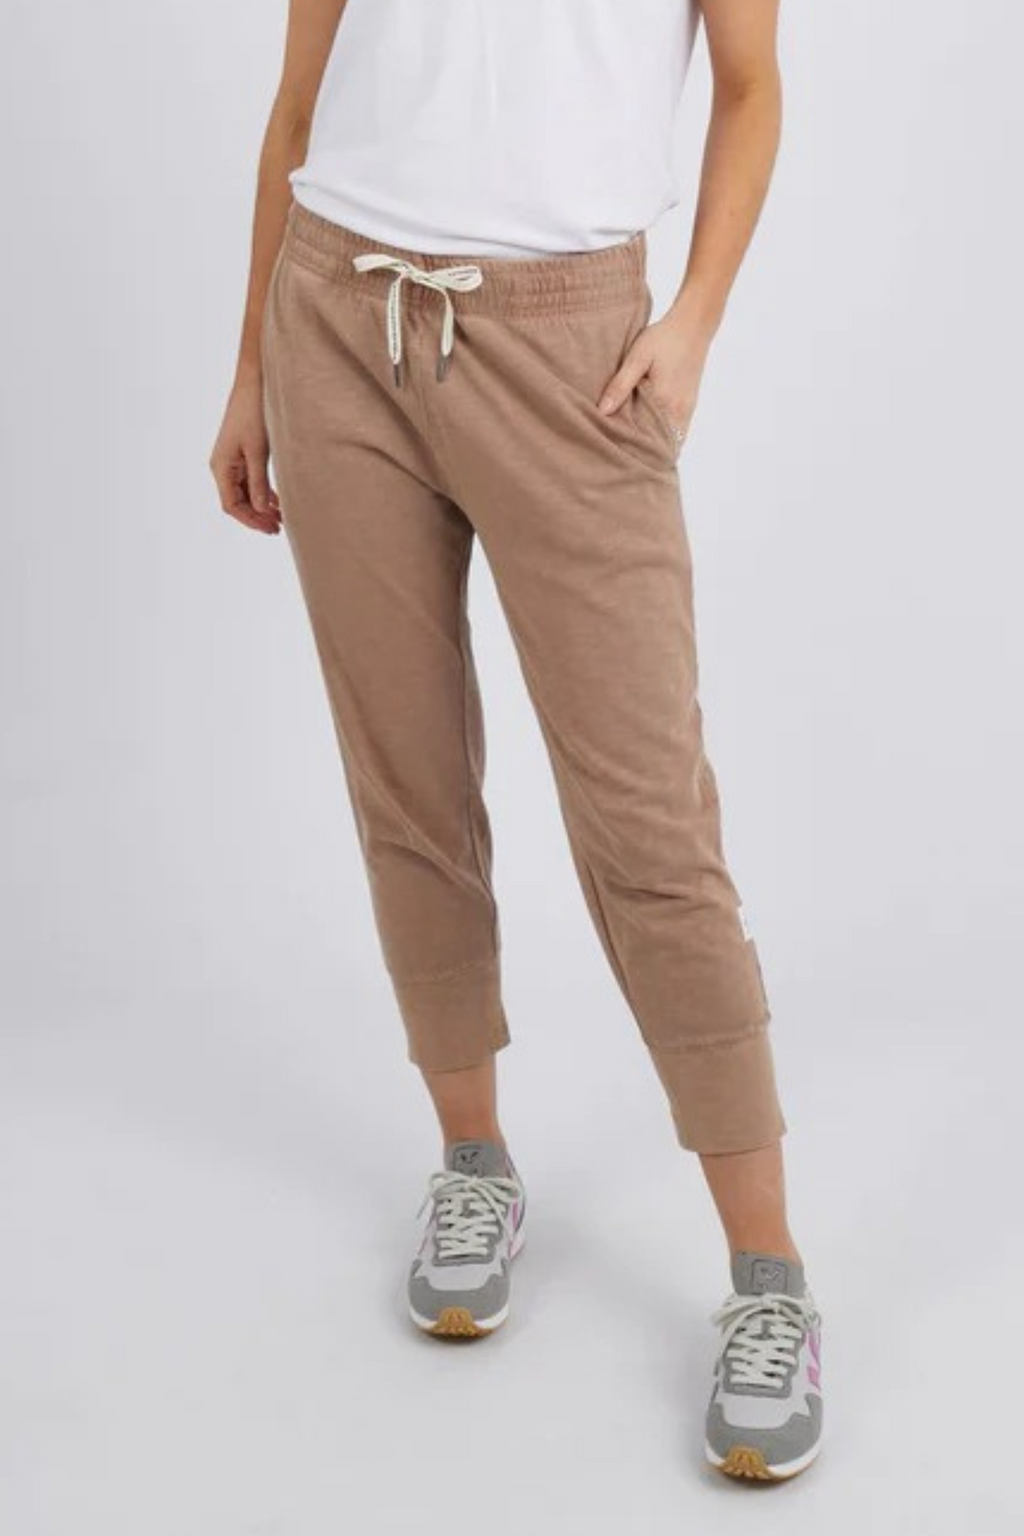 Fundamental Brunch Pant - White – Country Living